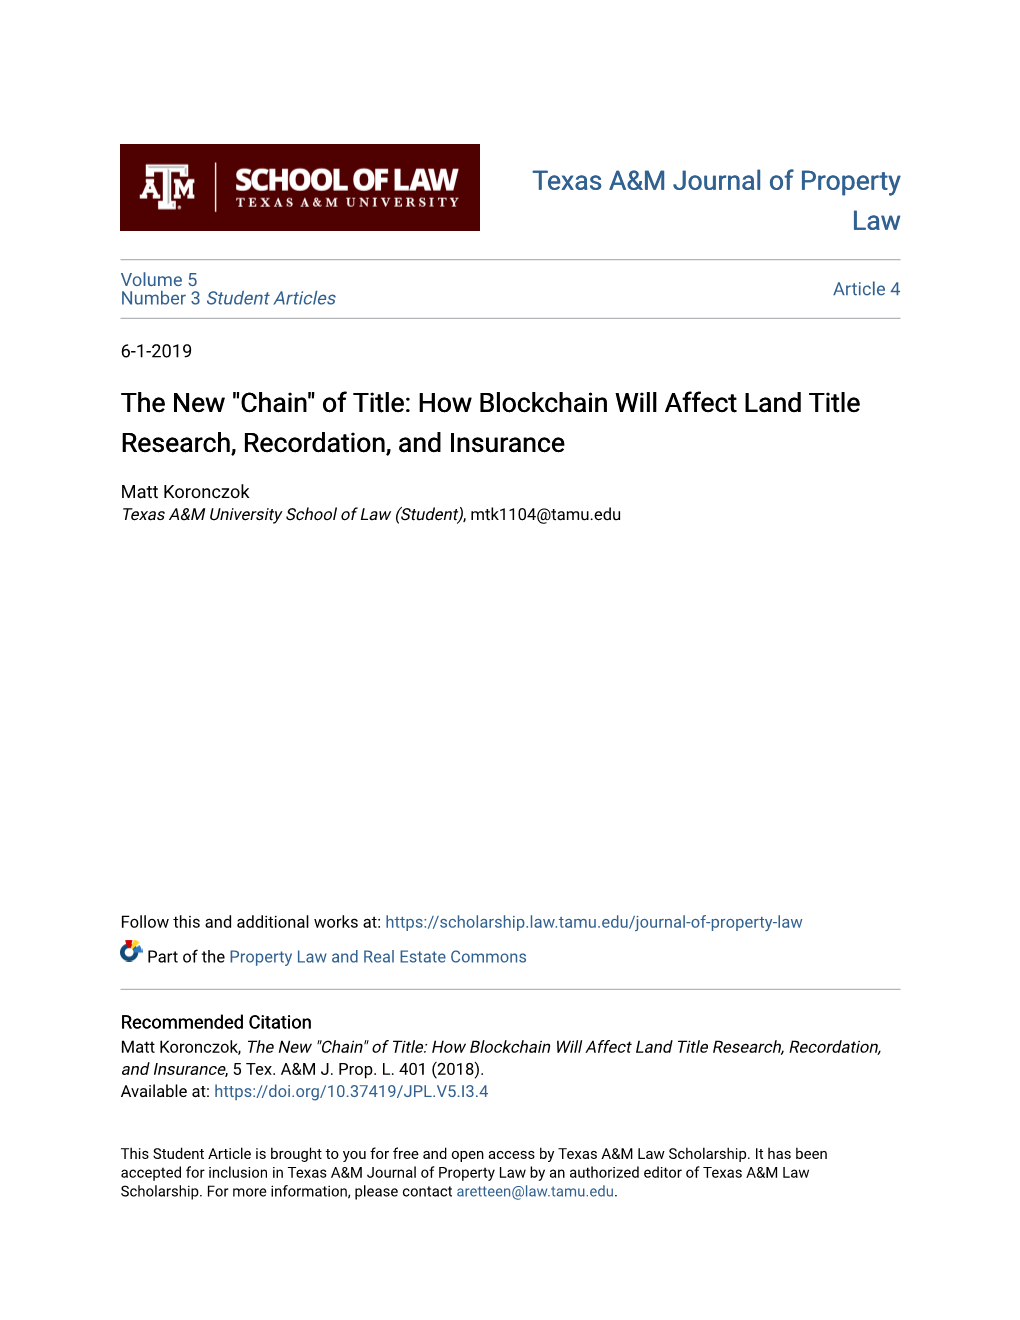 "Chain" of Title: How Blockchain Will Affect Land Title Research, Recordation, and Insurance